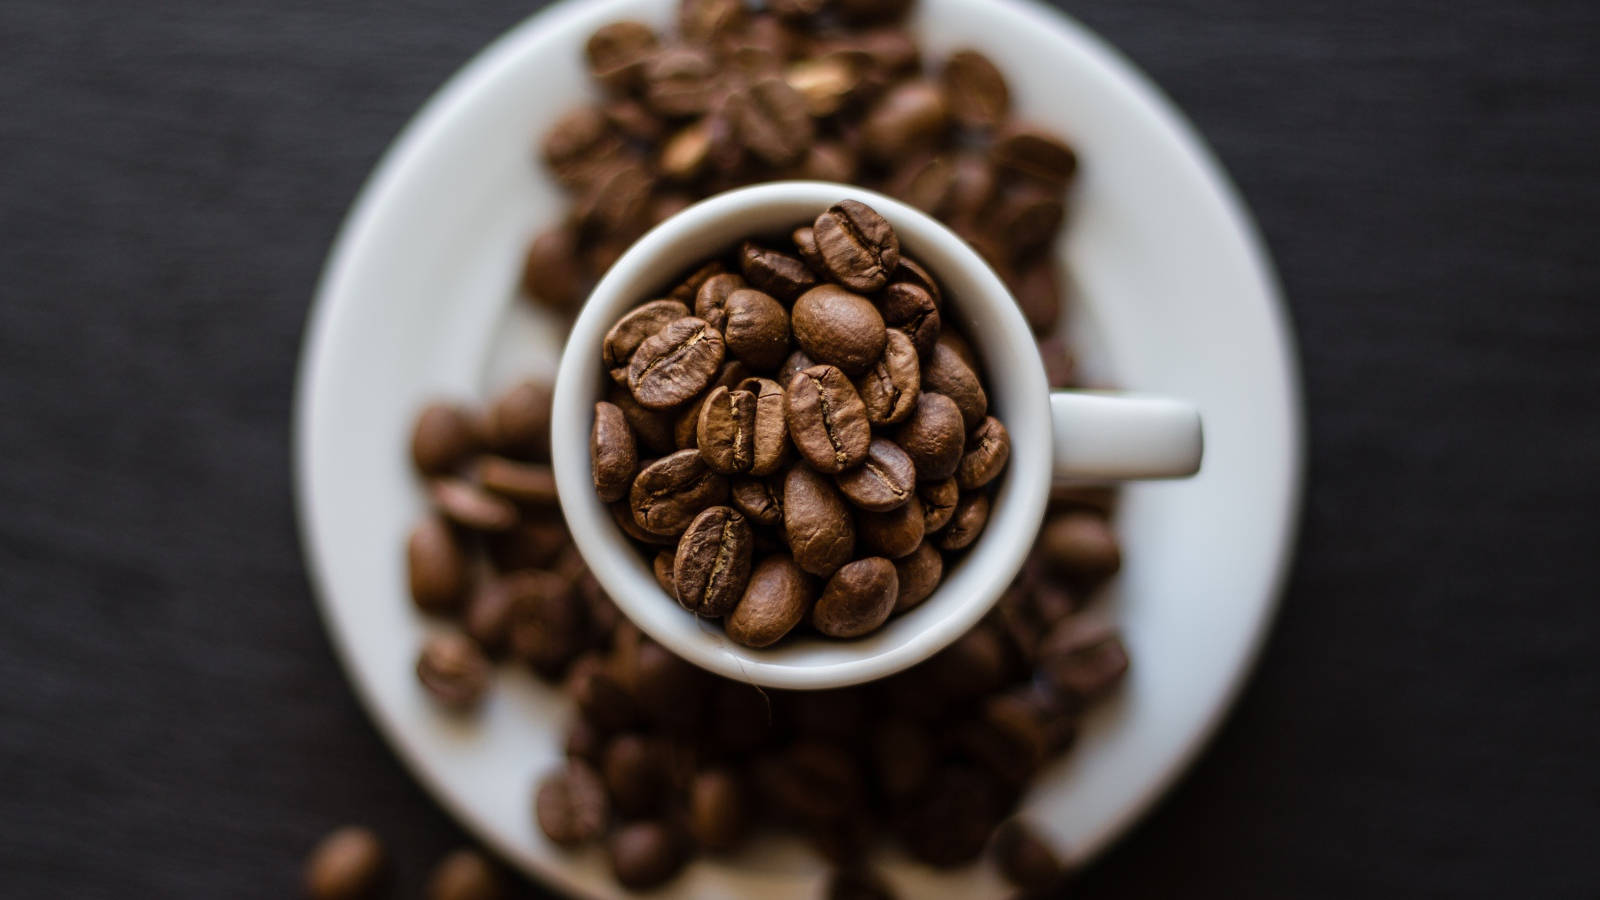 Top View Of Coffee Cup With Coffee Beans Background